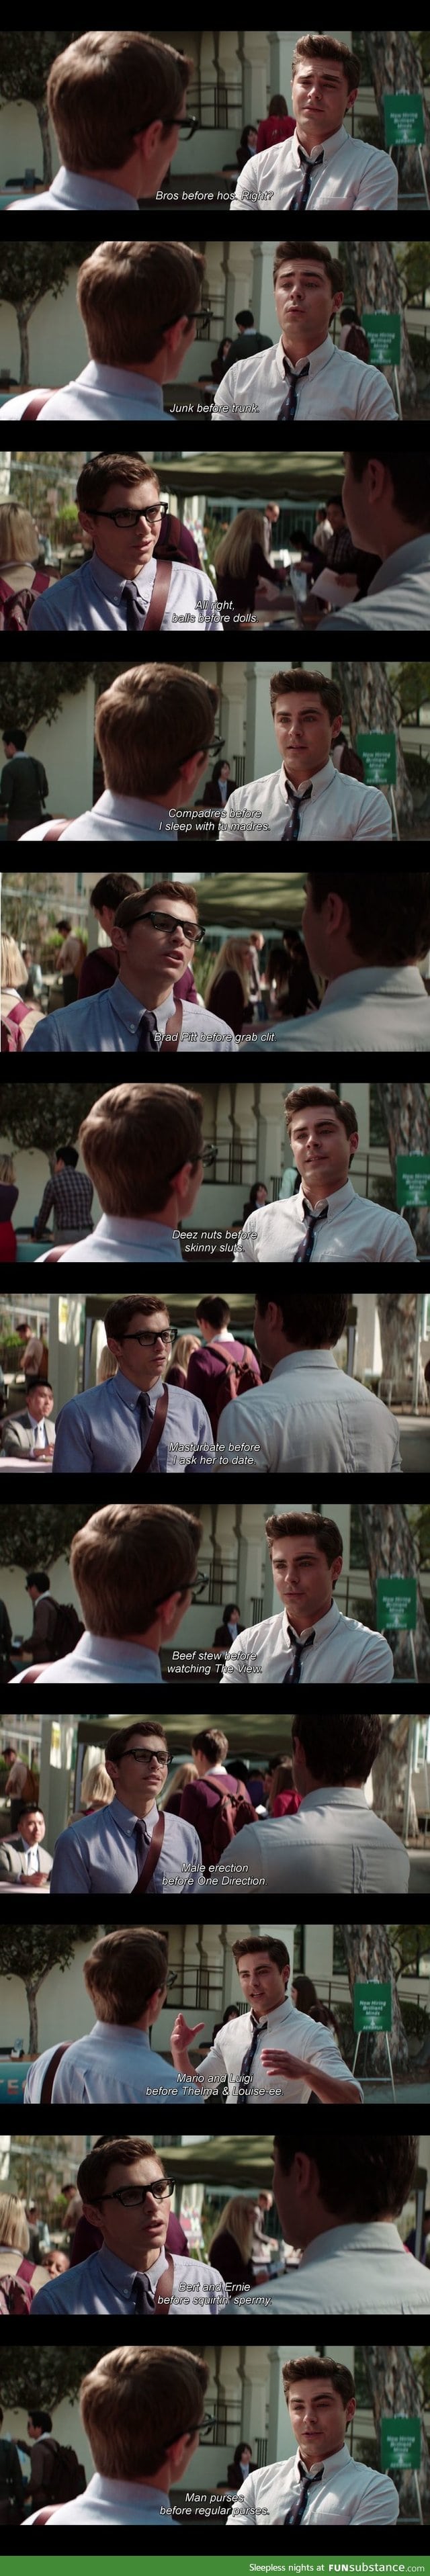 Zac and Dave in Neighbors